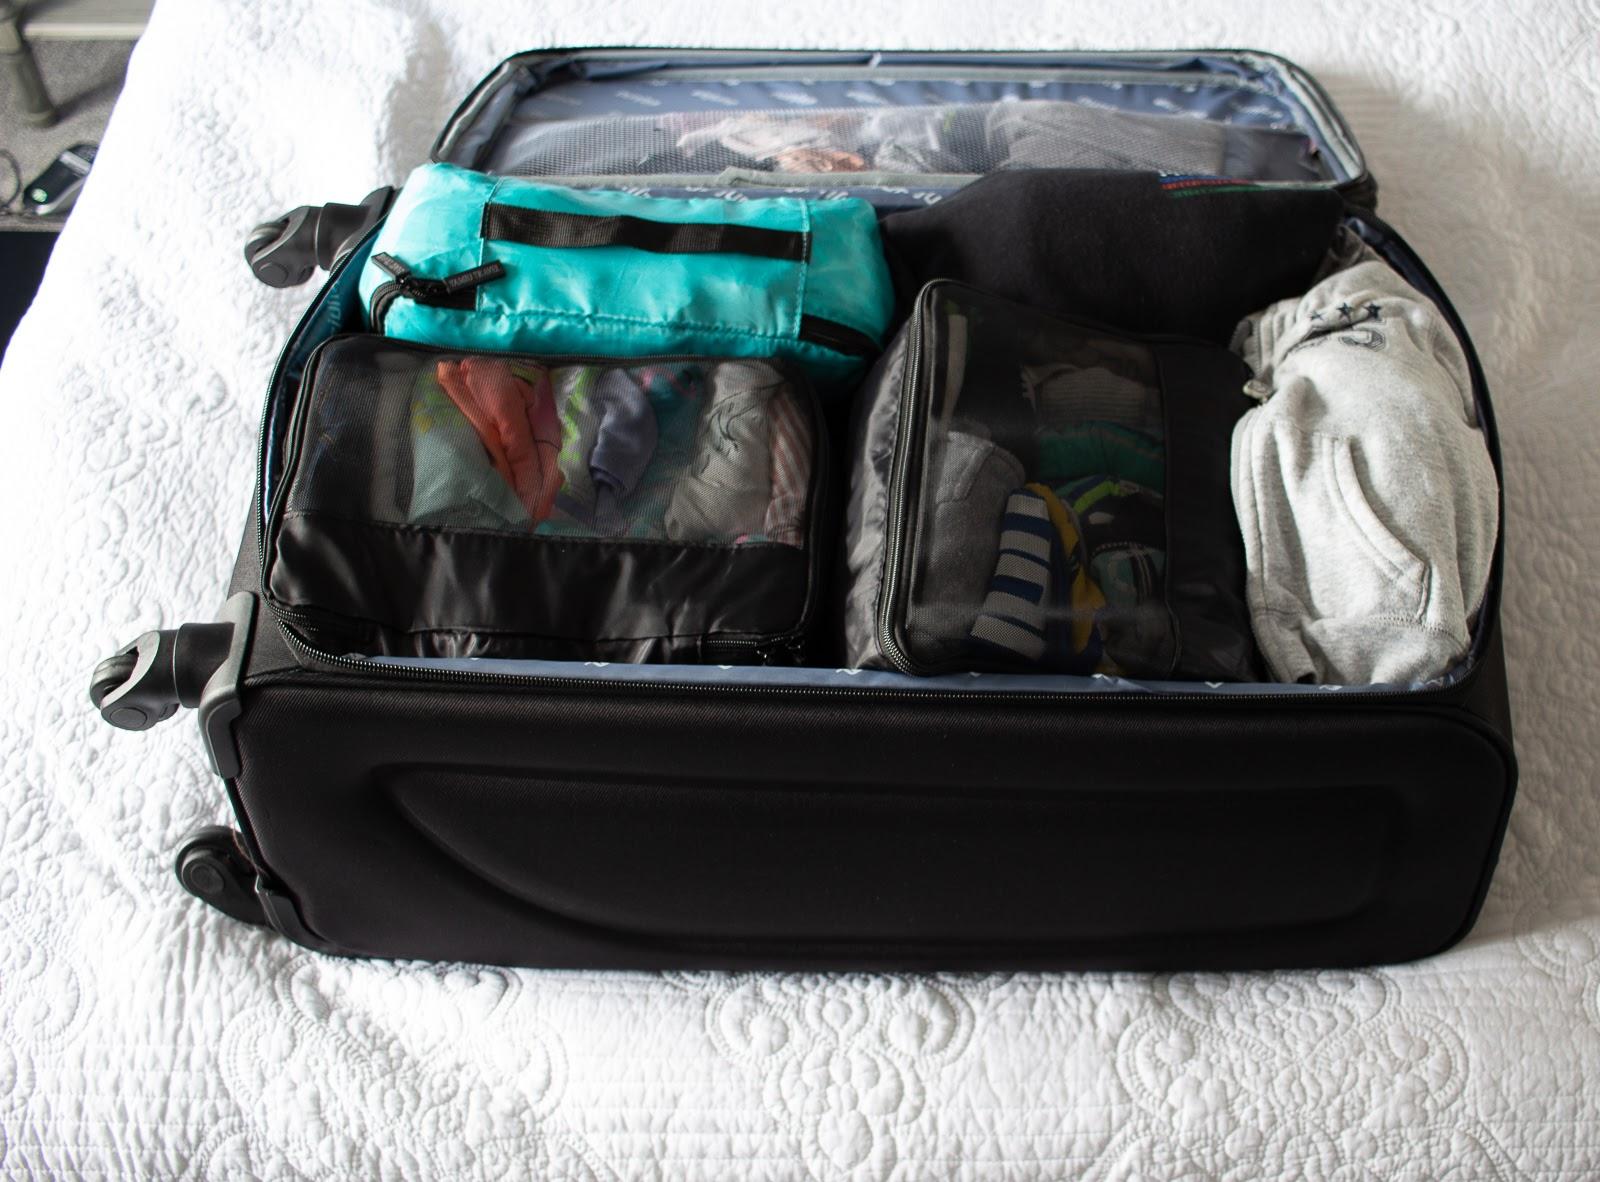 suitcase full of packing cubes